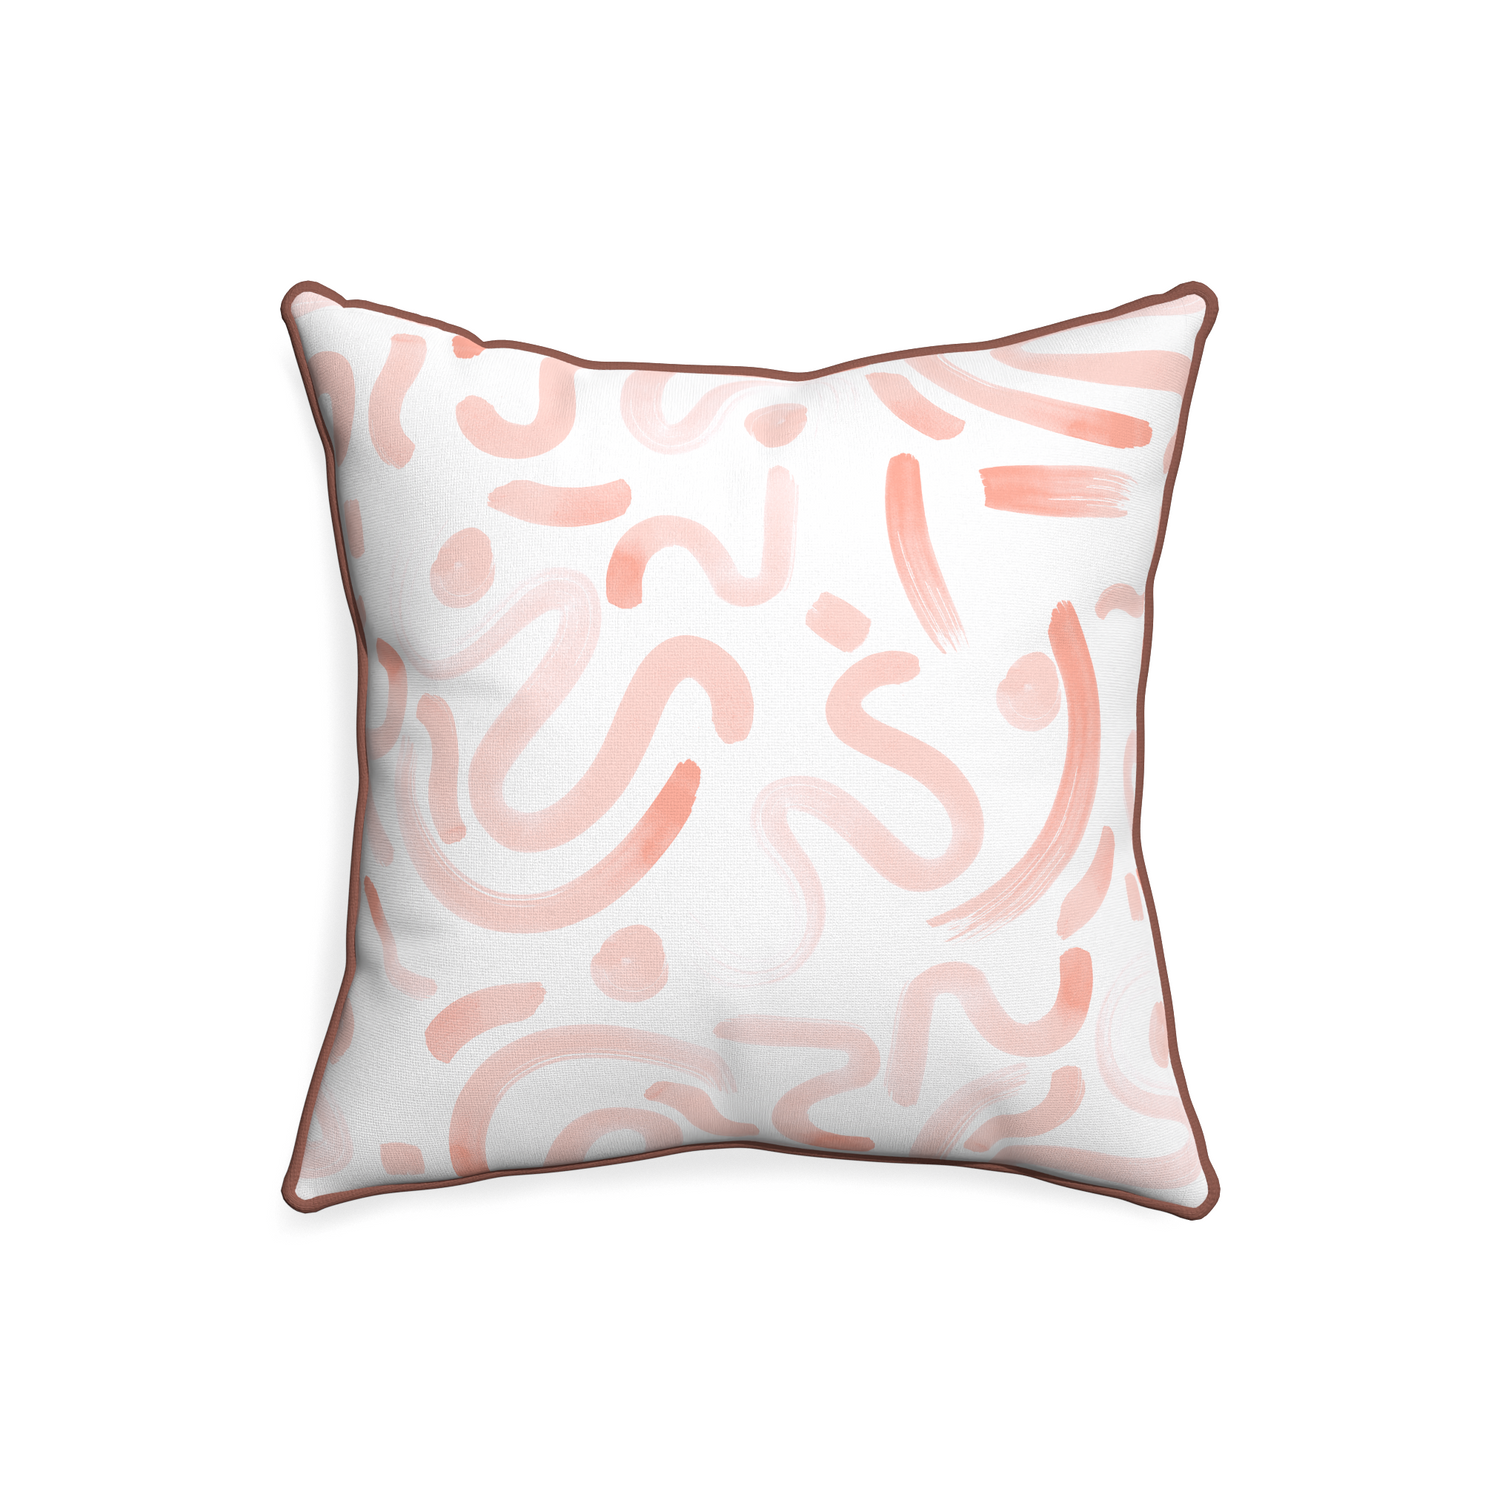 20-square hockney pink custom pillow with w piping on white background